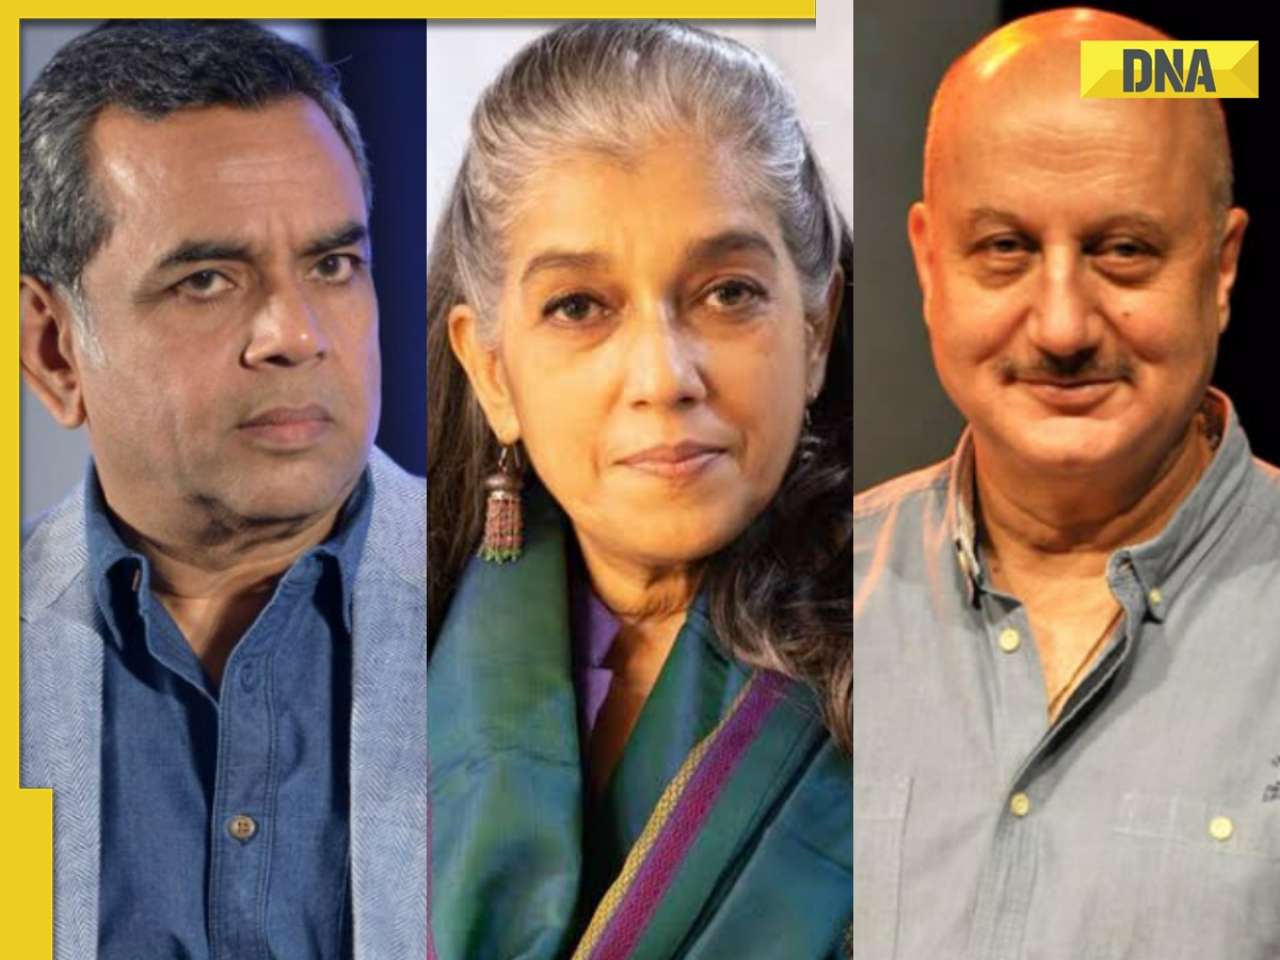   Ratna Pathak Shah on why she works with Anupam Kher, Paresh Rawal despite ideological differences: 'That's not my...' 